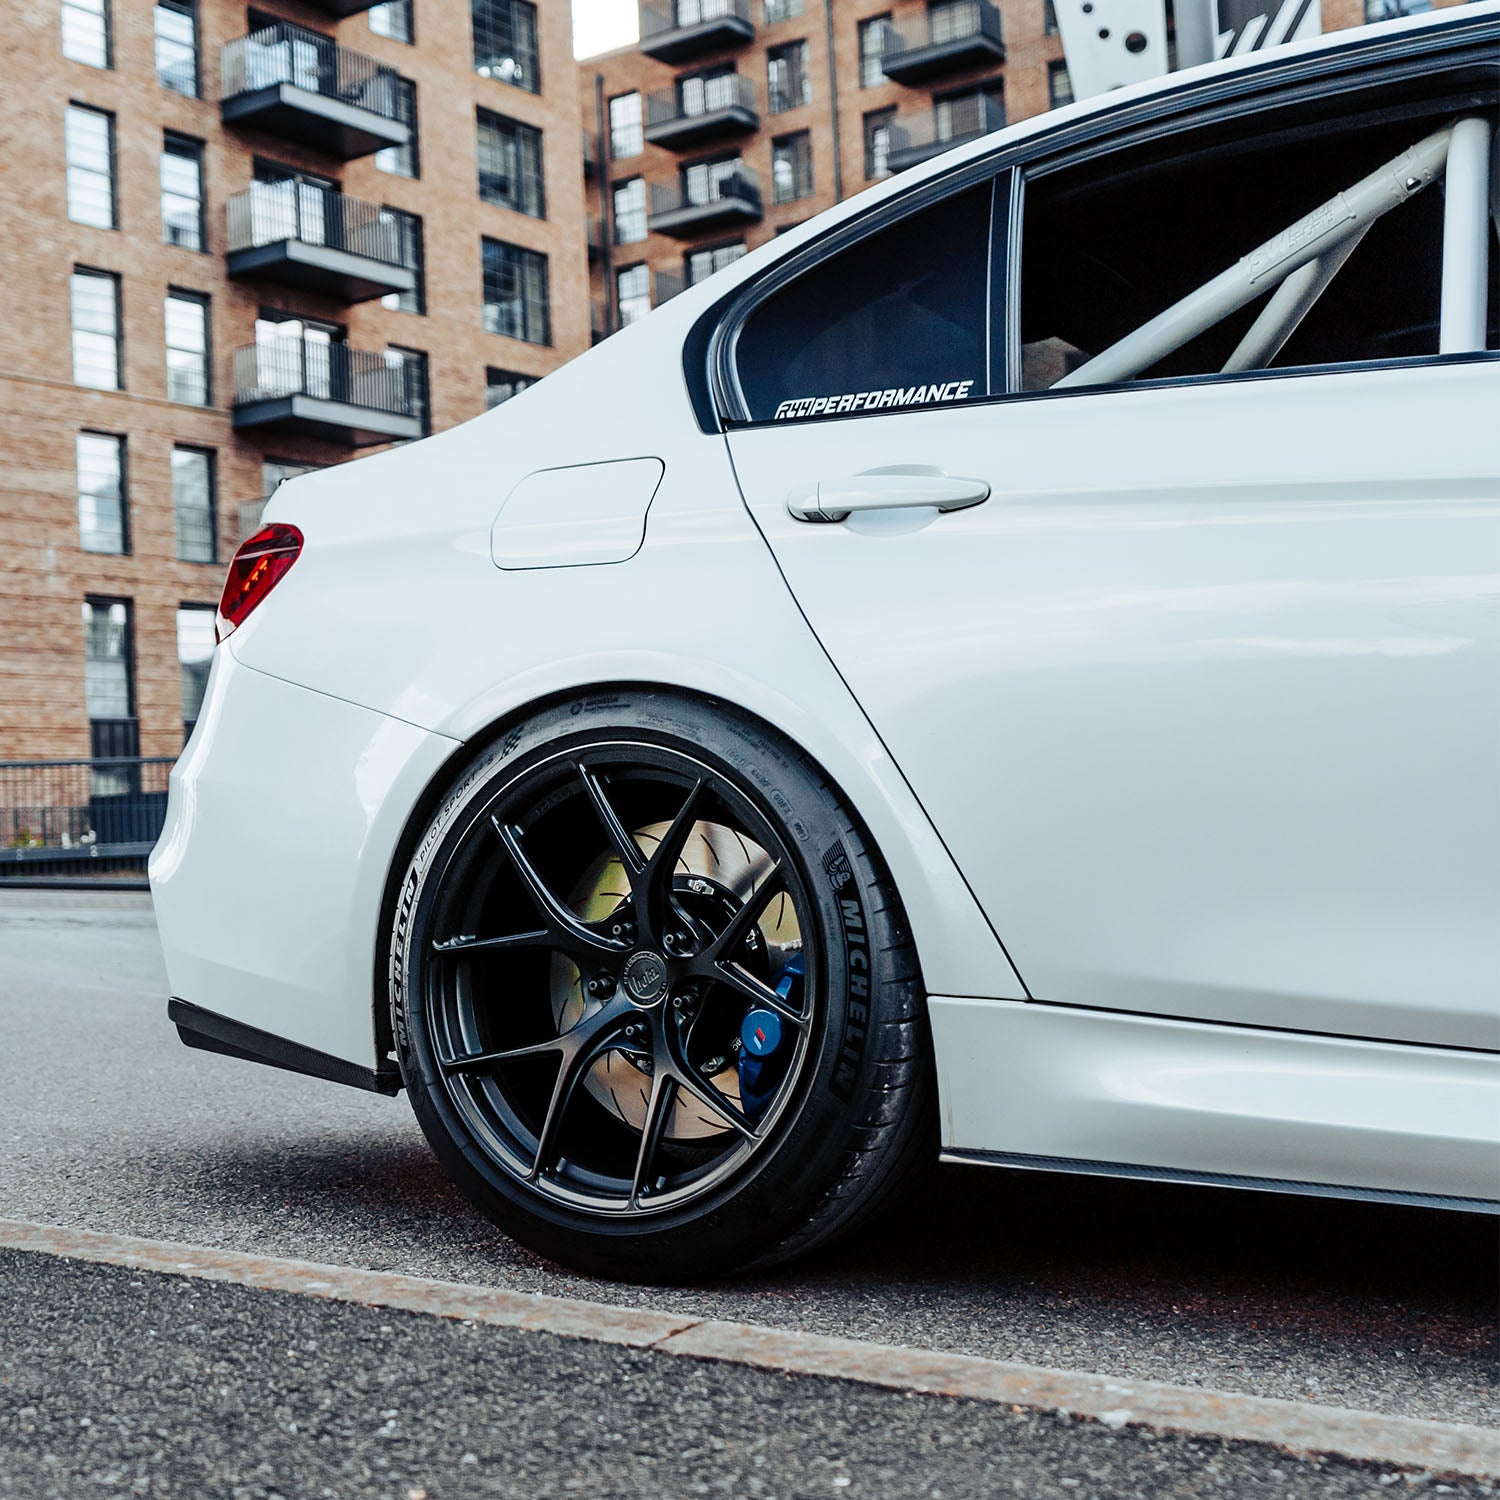 Bola FP2 19 Forged Alloy Wheels In Satin Black On BMW F80 M3